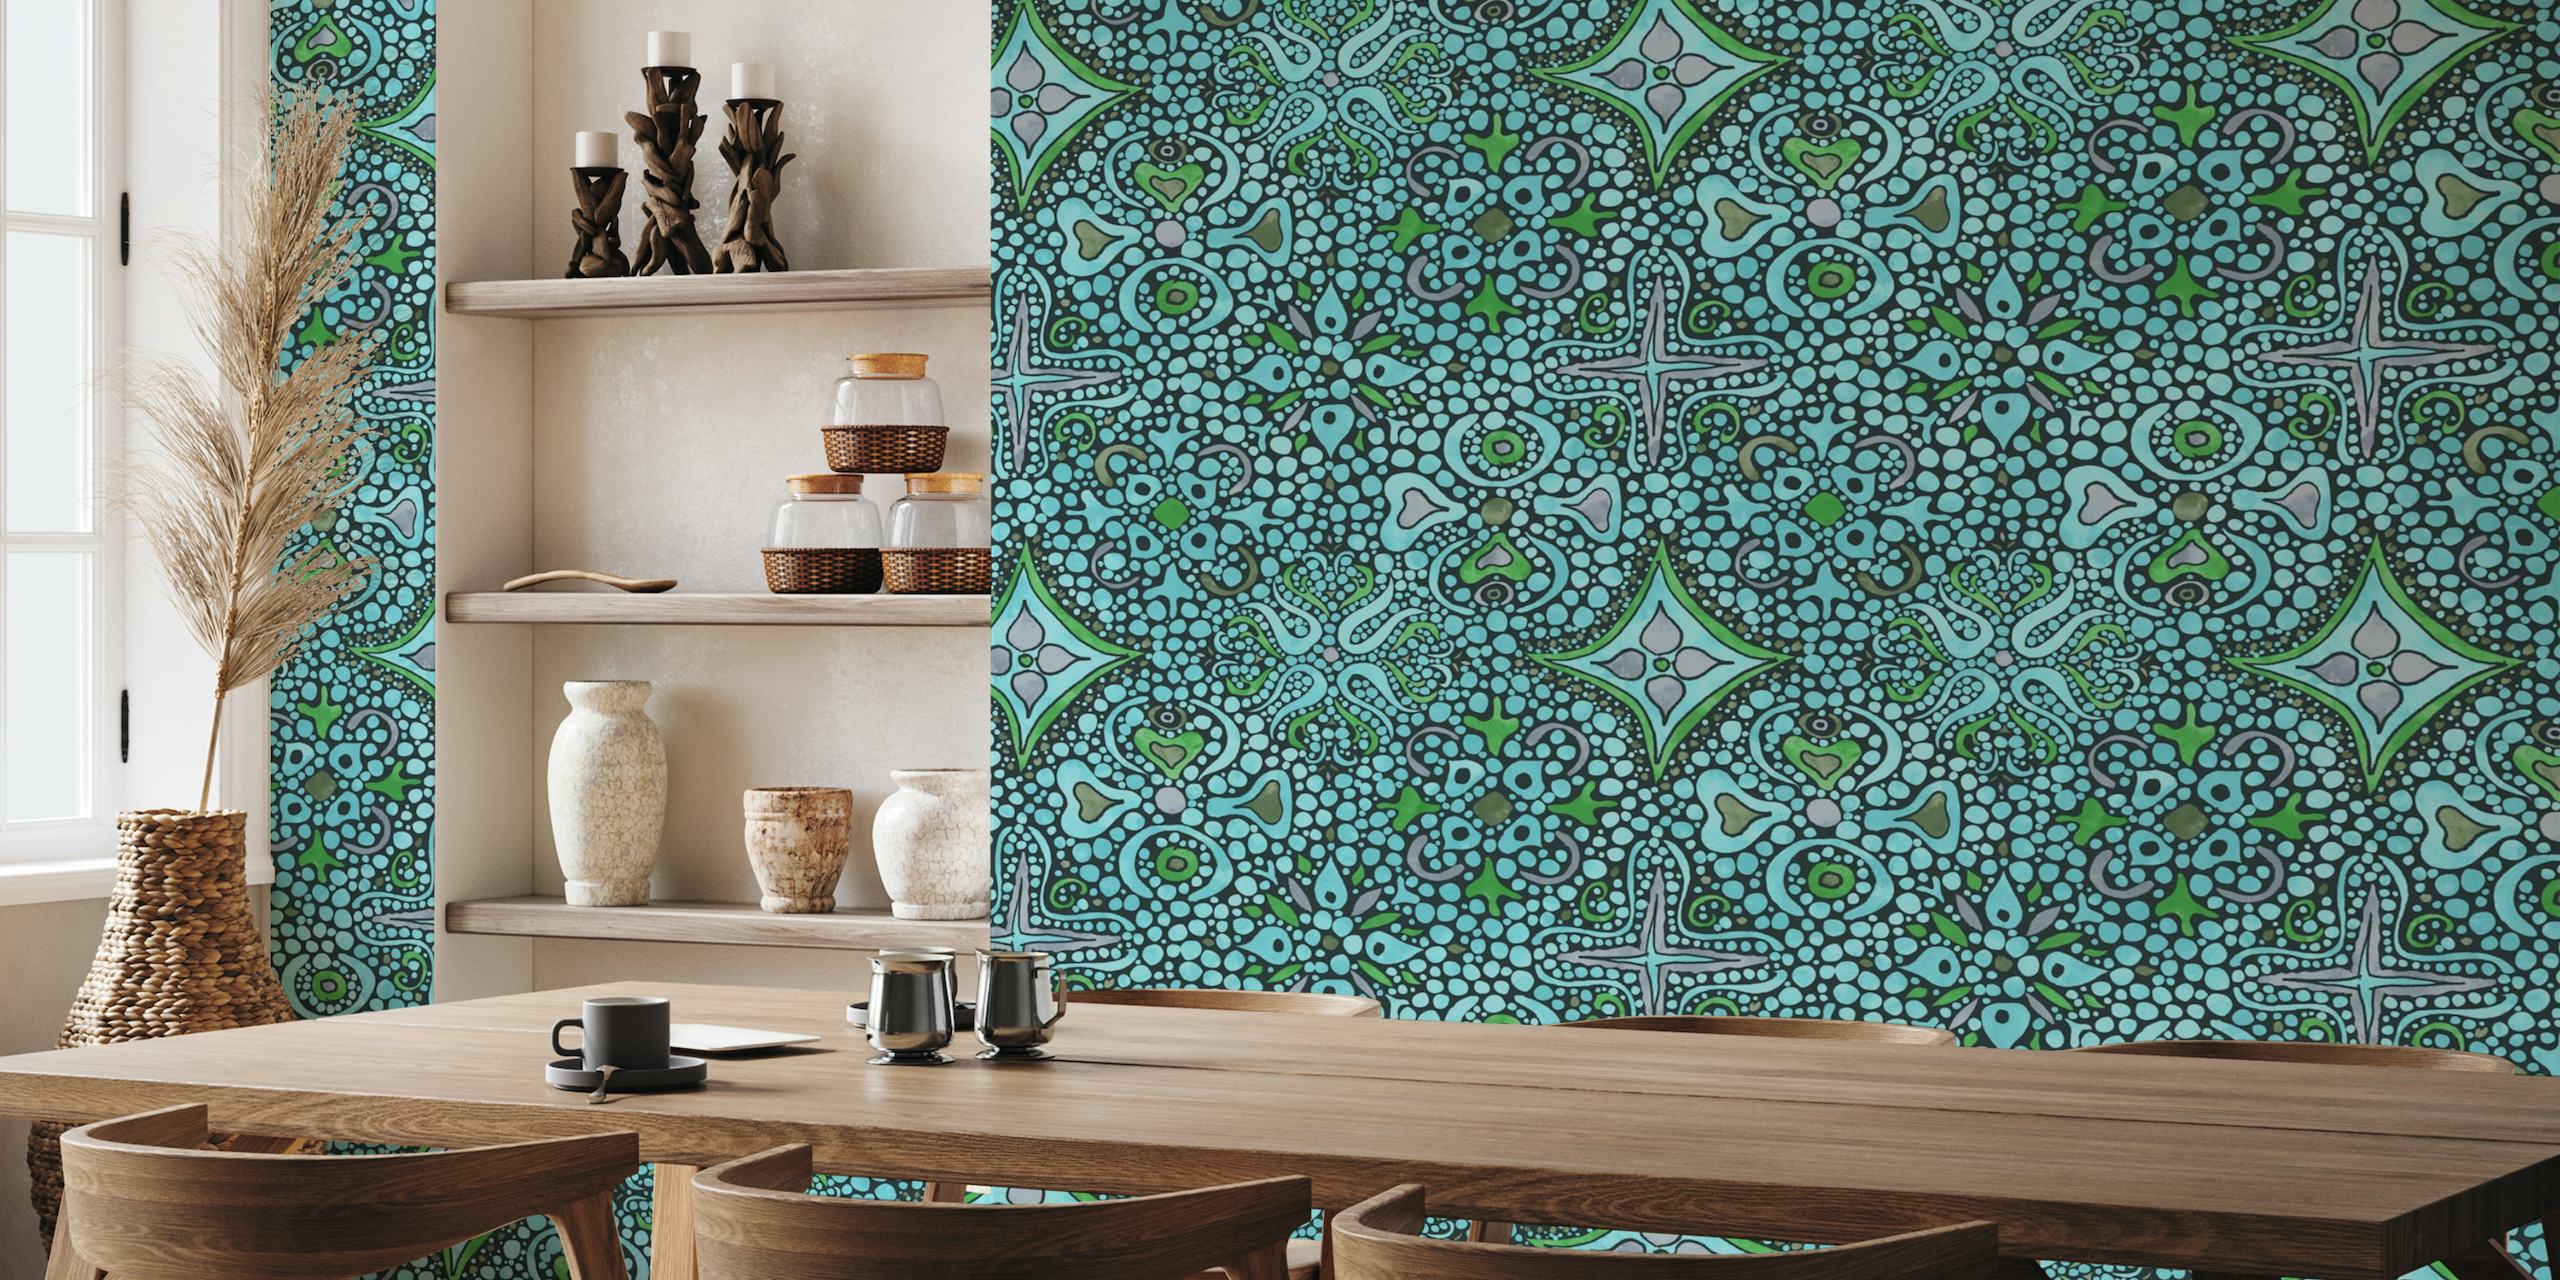 Teal mosaics with maximalist designs tapetit